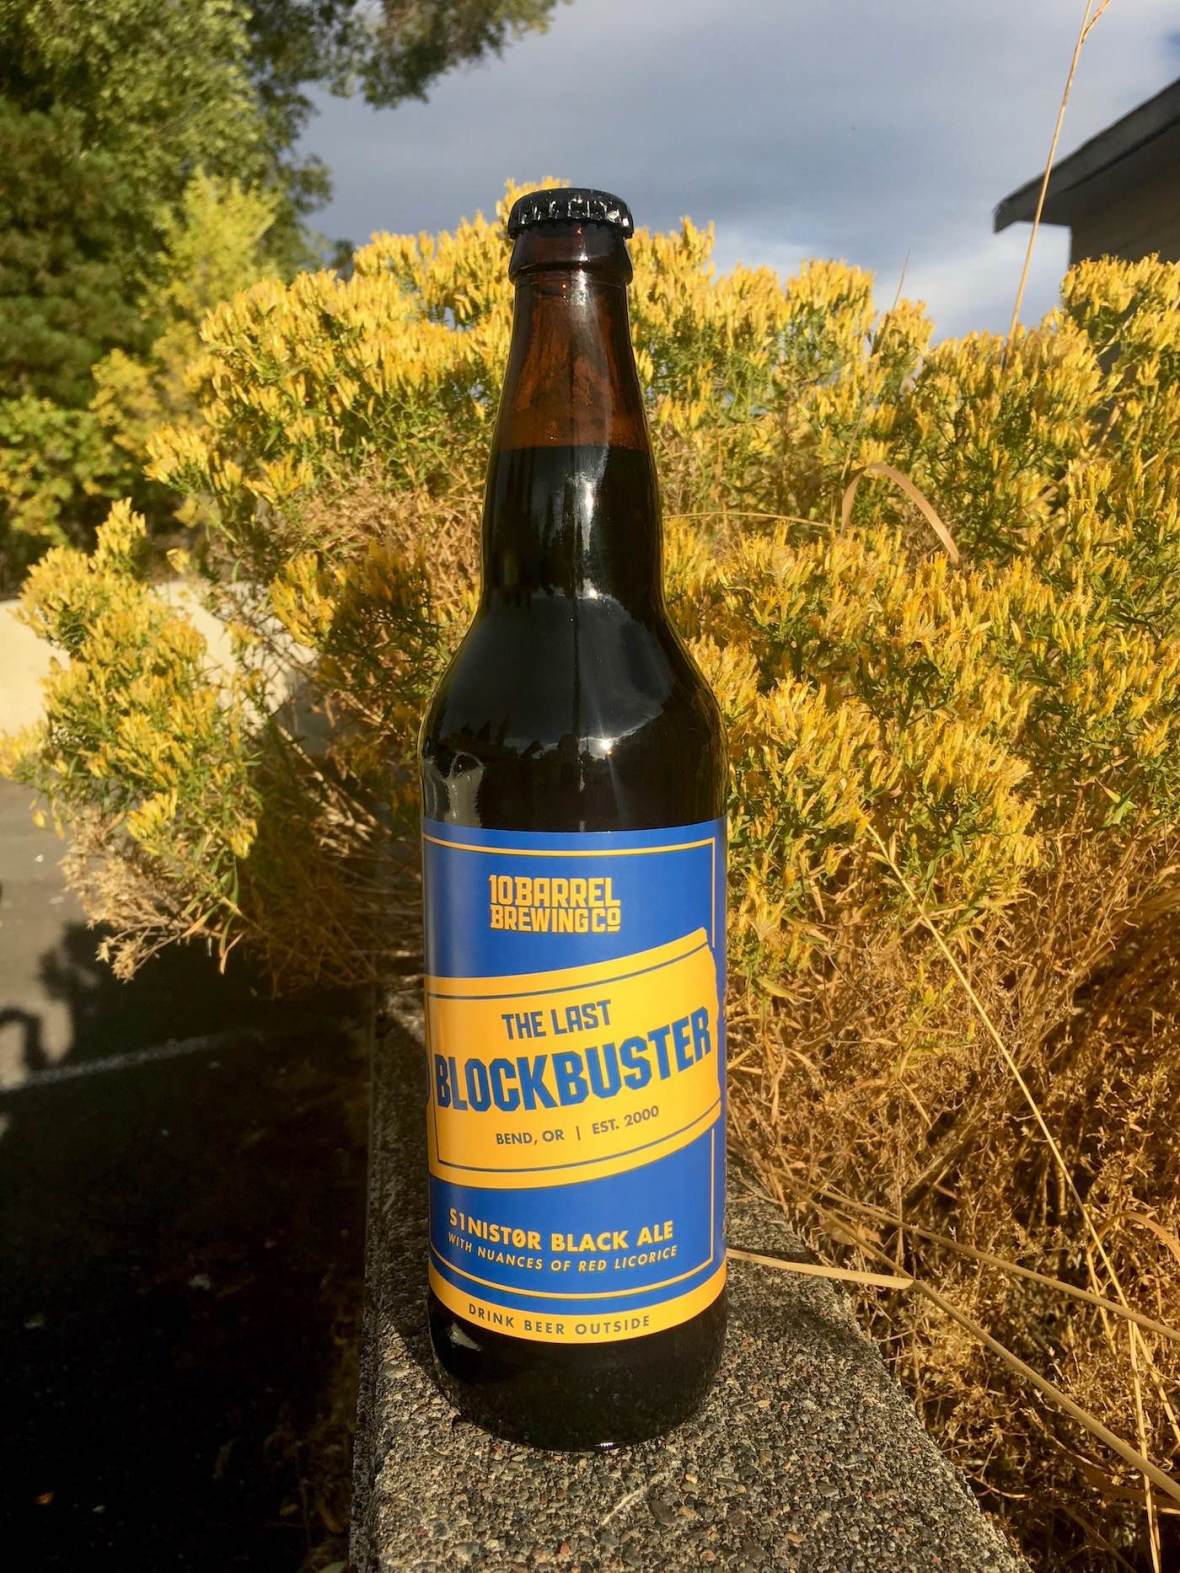 The Last Blockbuster limited release S1nist0r Black Ale from 10 Barrel Brewing Co